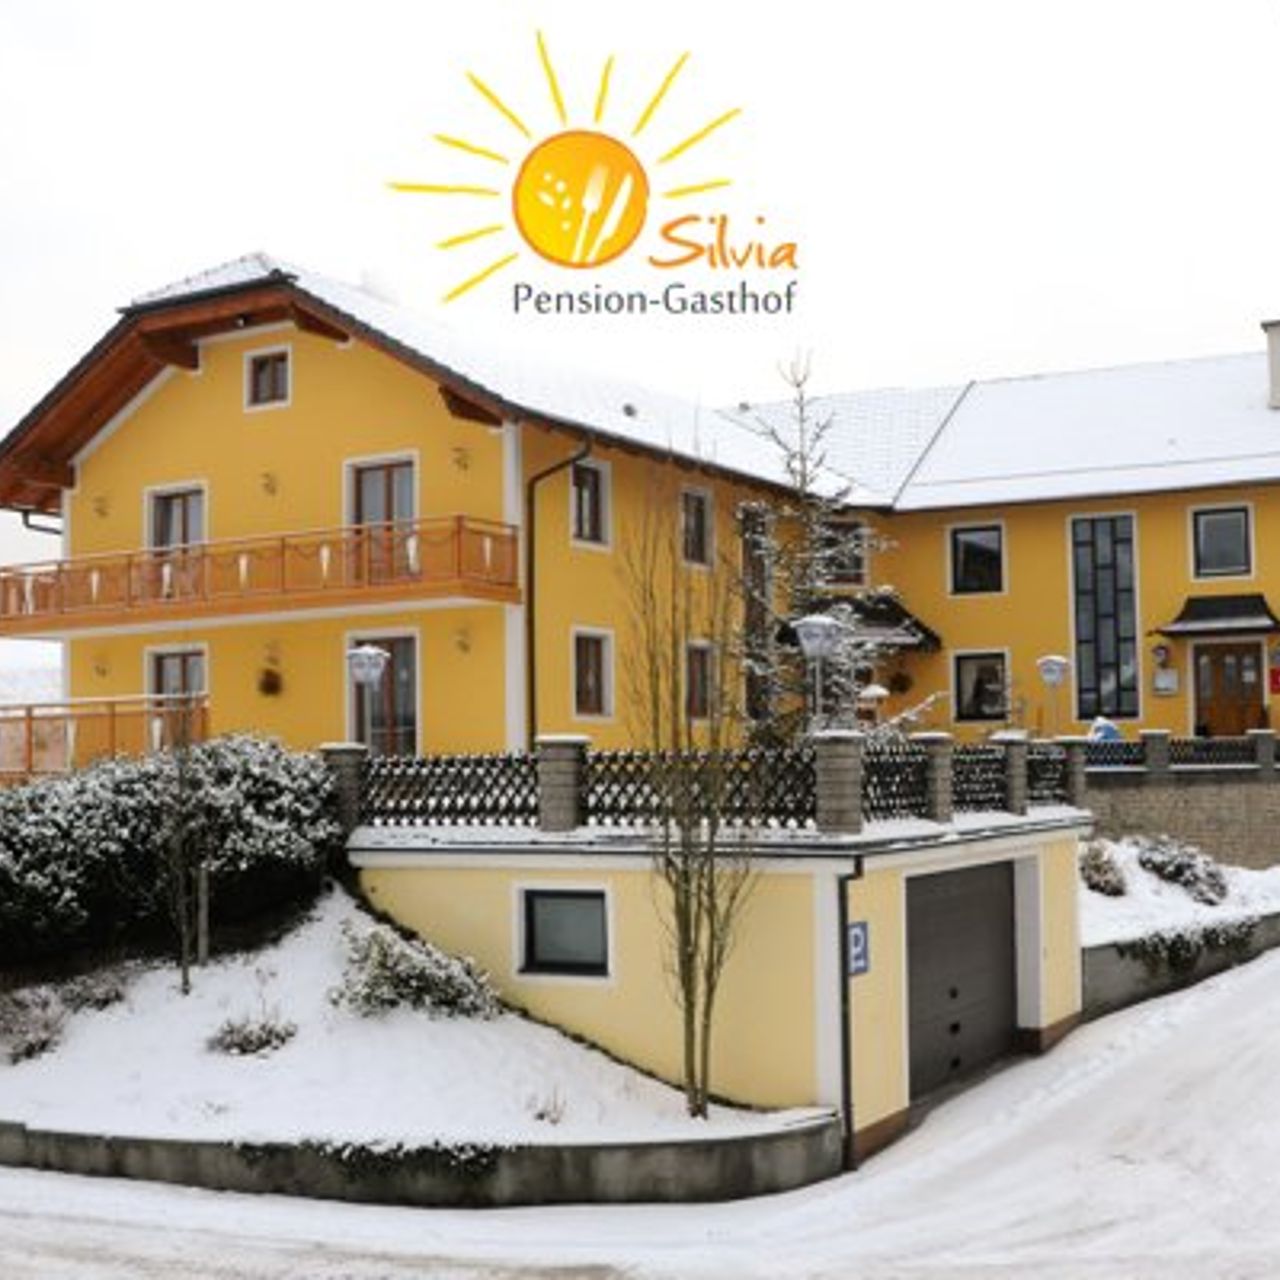 Pension-Gasthof Silvia - Haibach ob der Donau - Great prices at HOTEL INFO